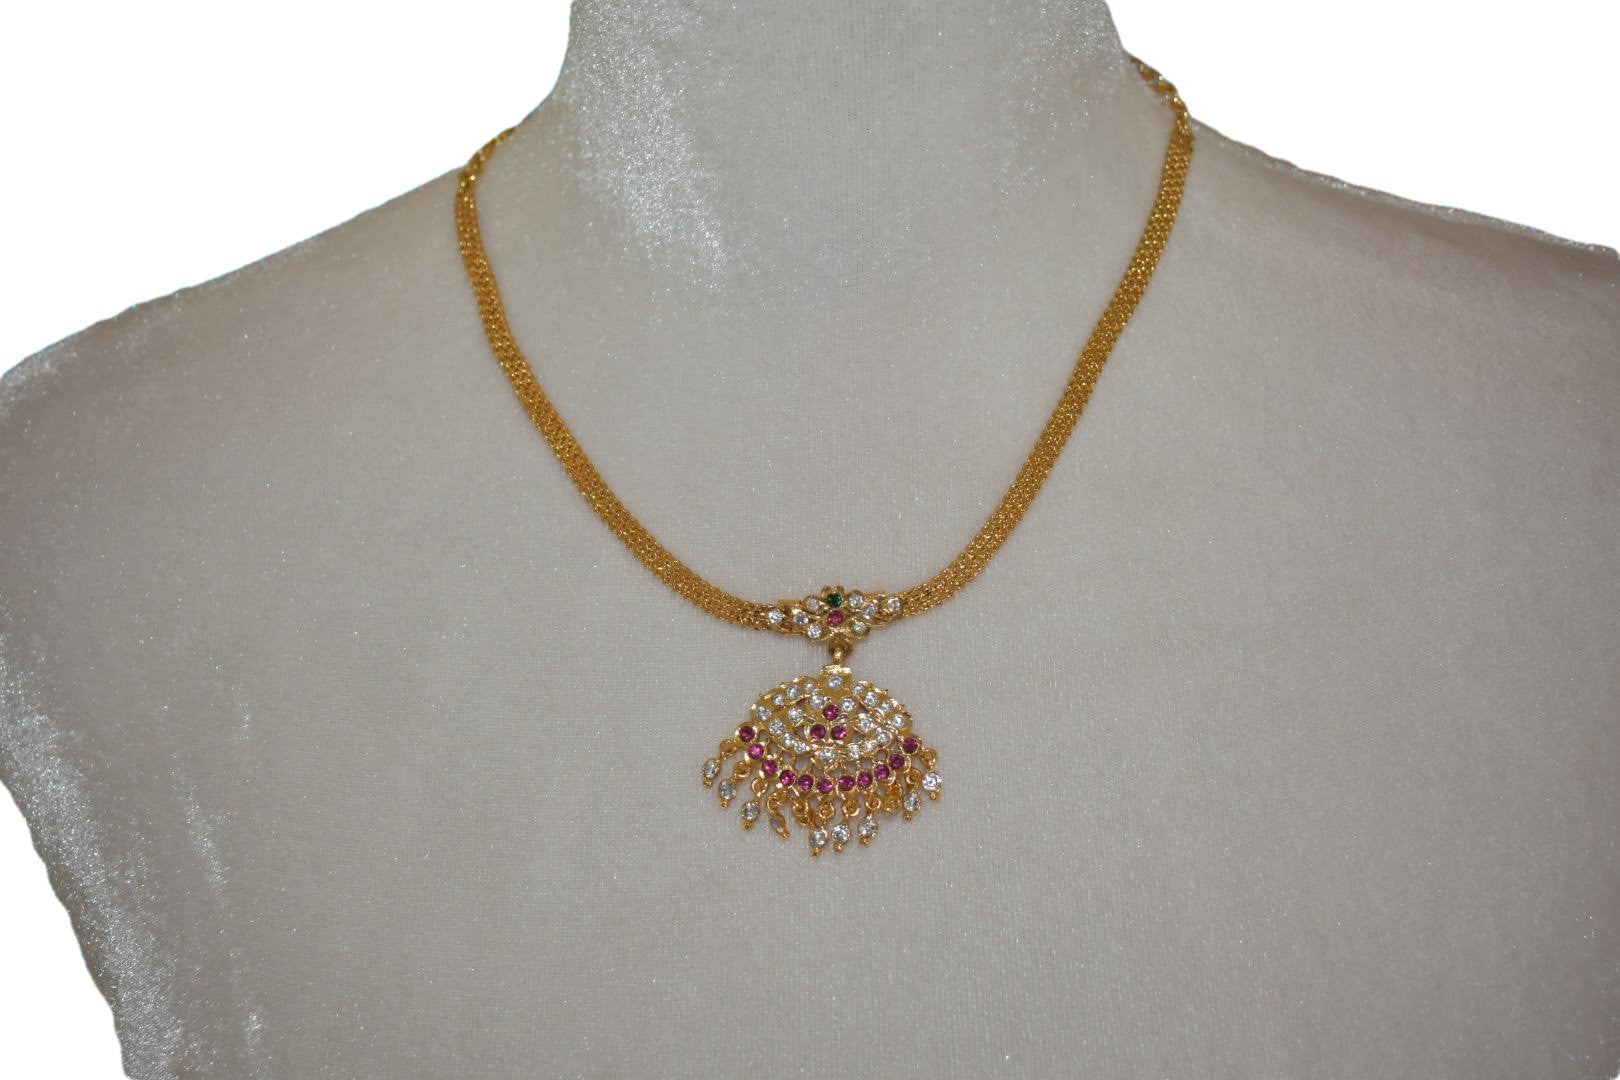 Gold Plated - Temple Jewelry - Short Necklace with Jewel stones and Gold Plated Beads